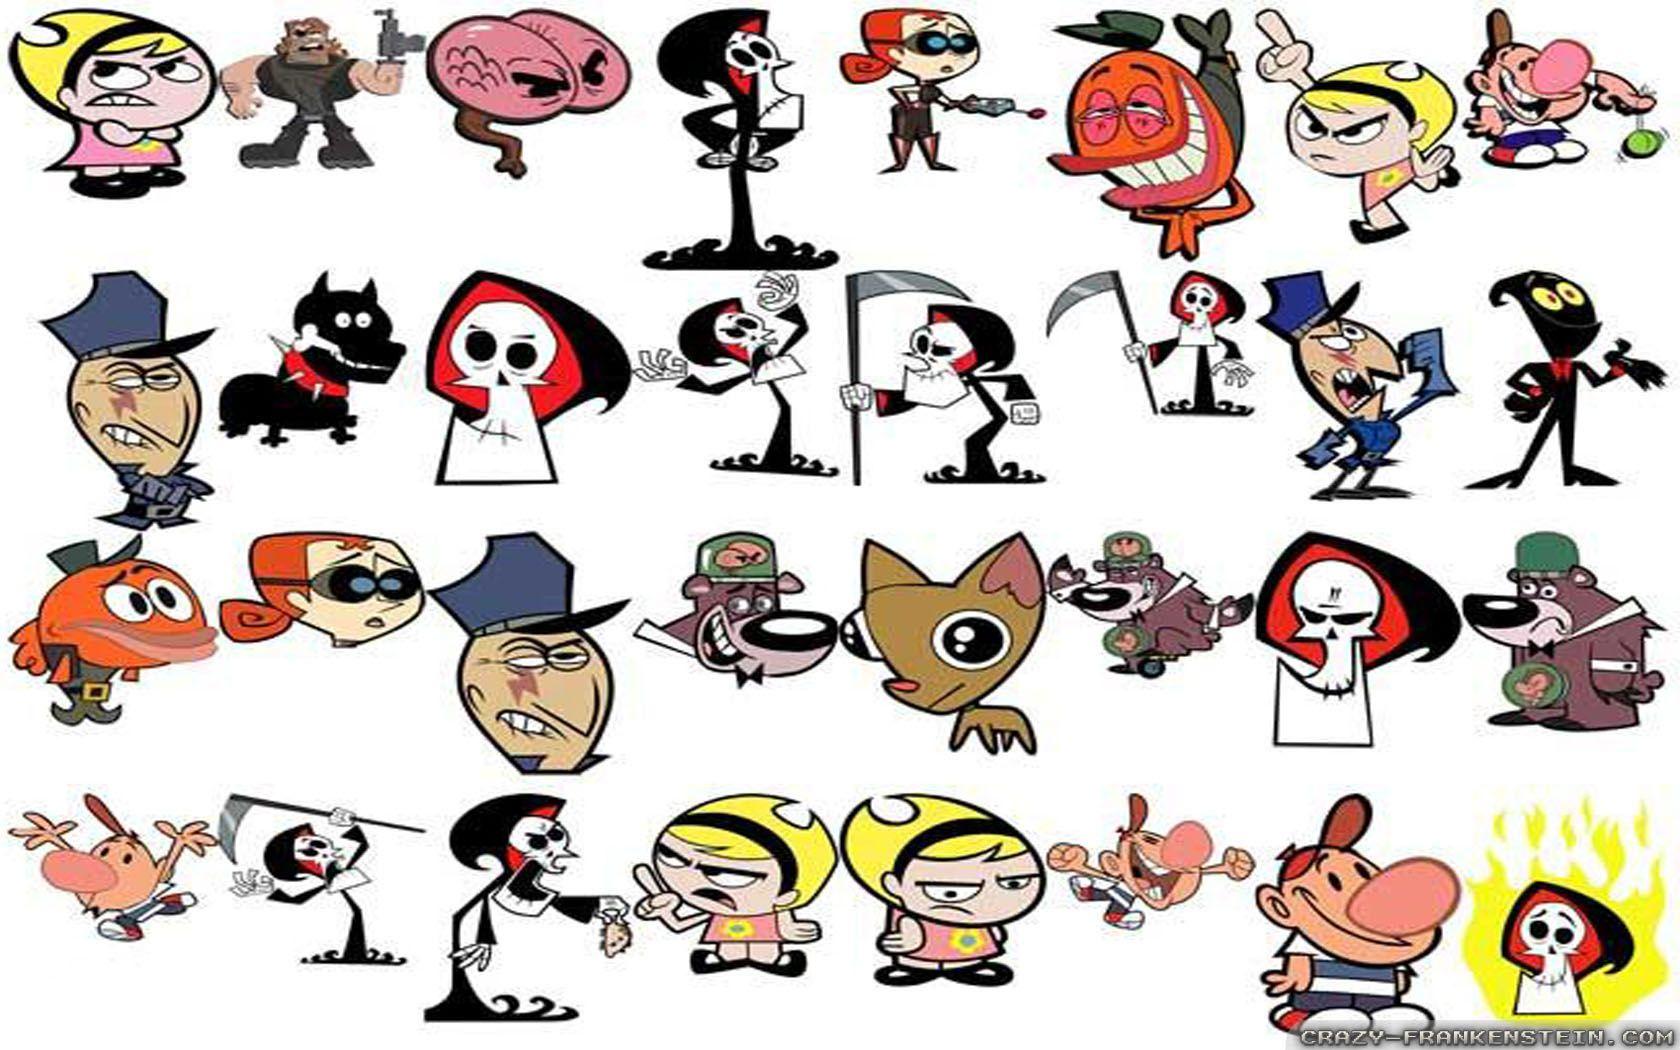 grim adventures of billy and mandy